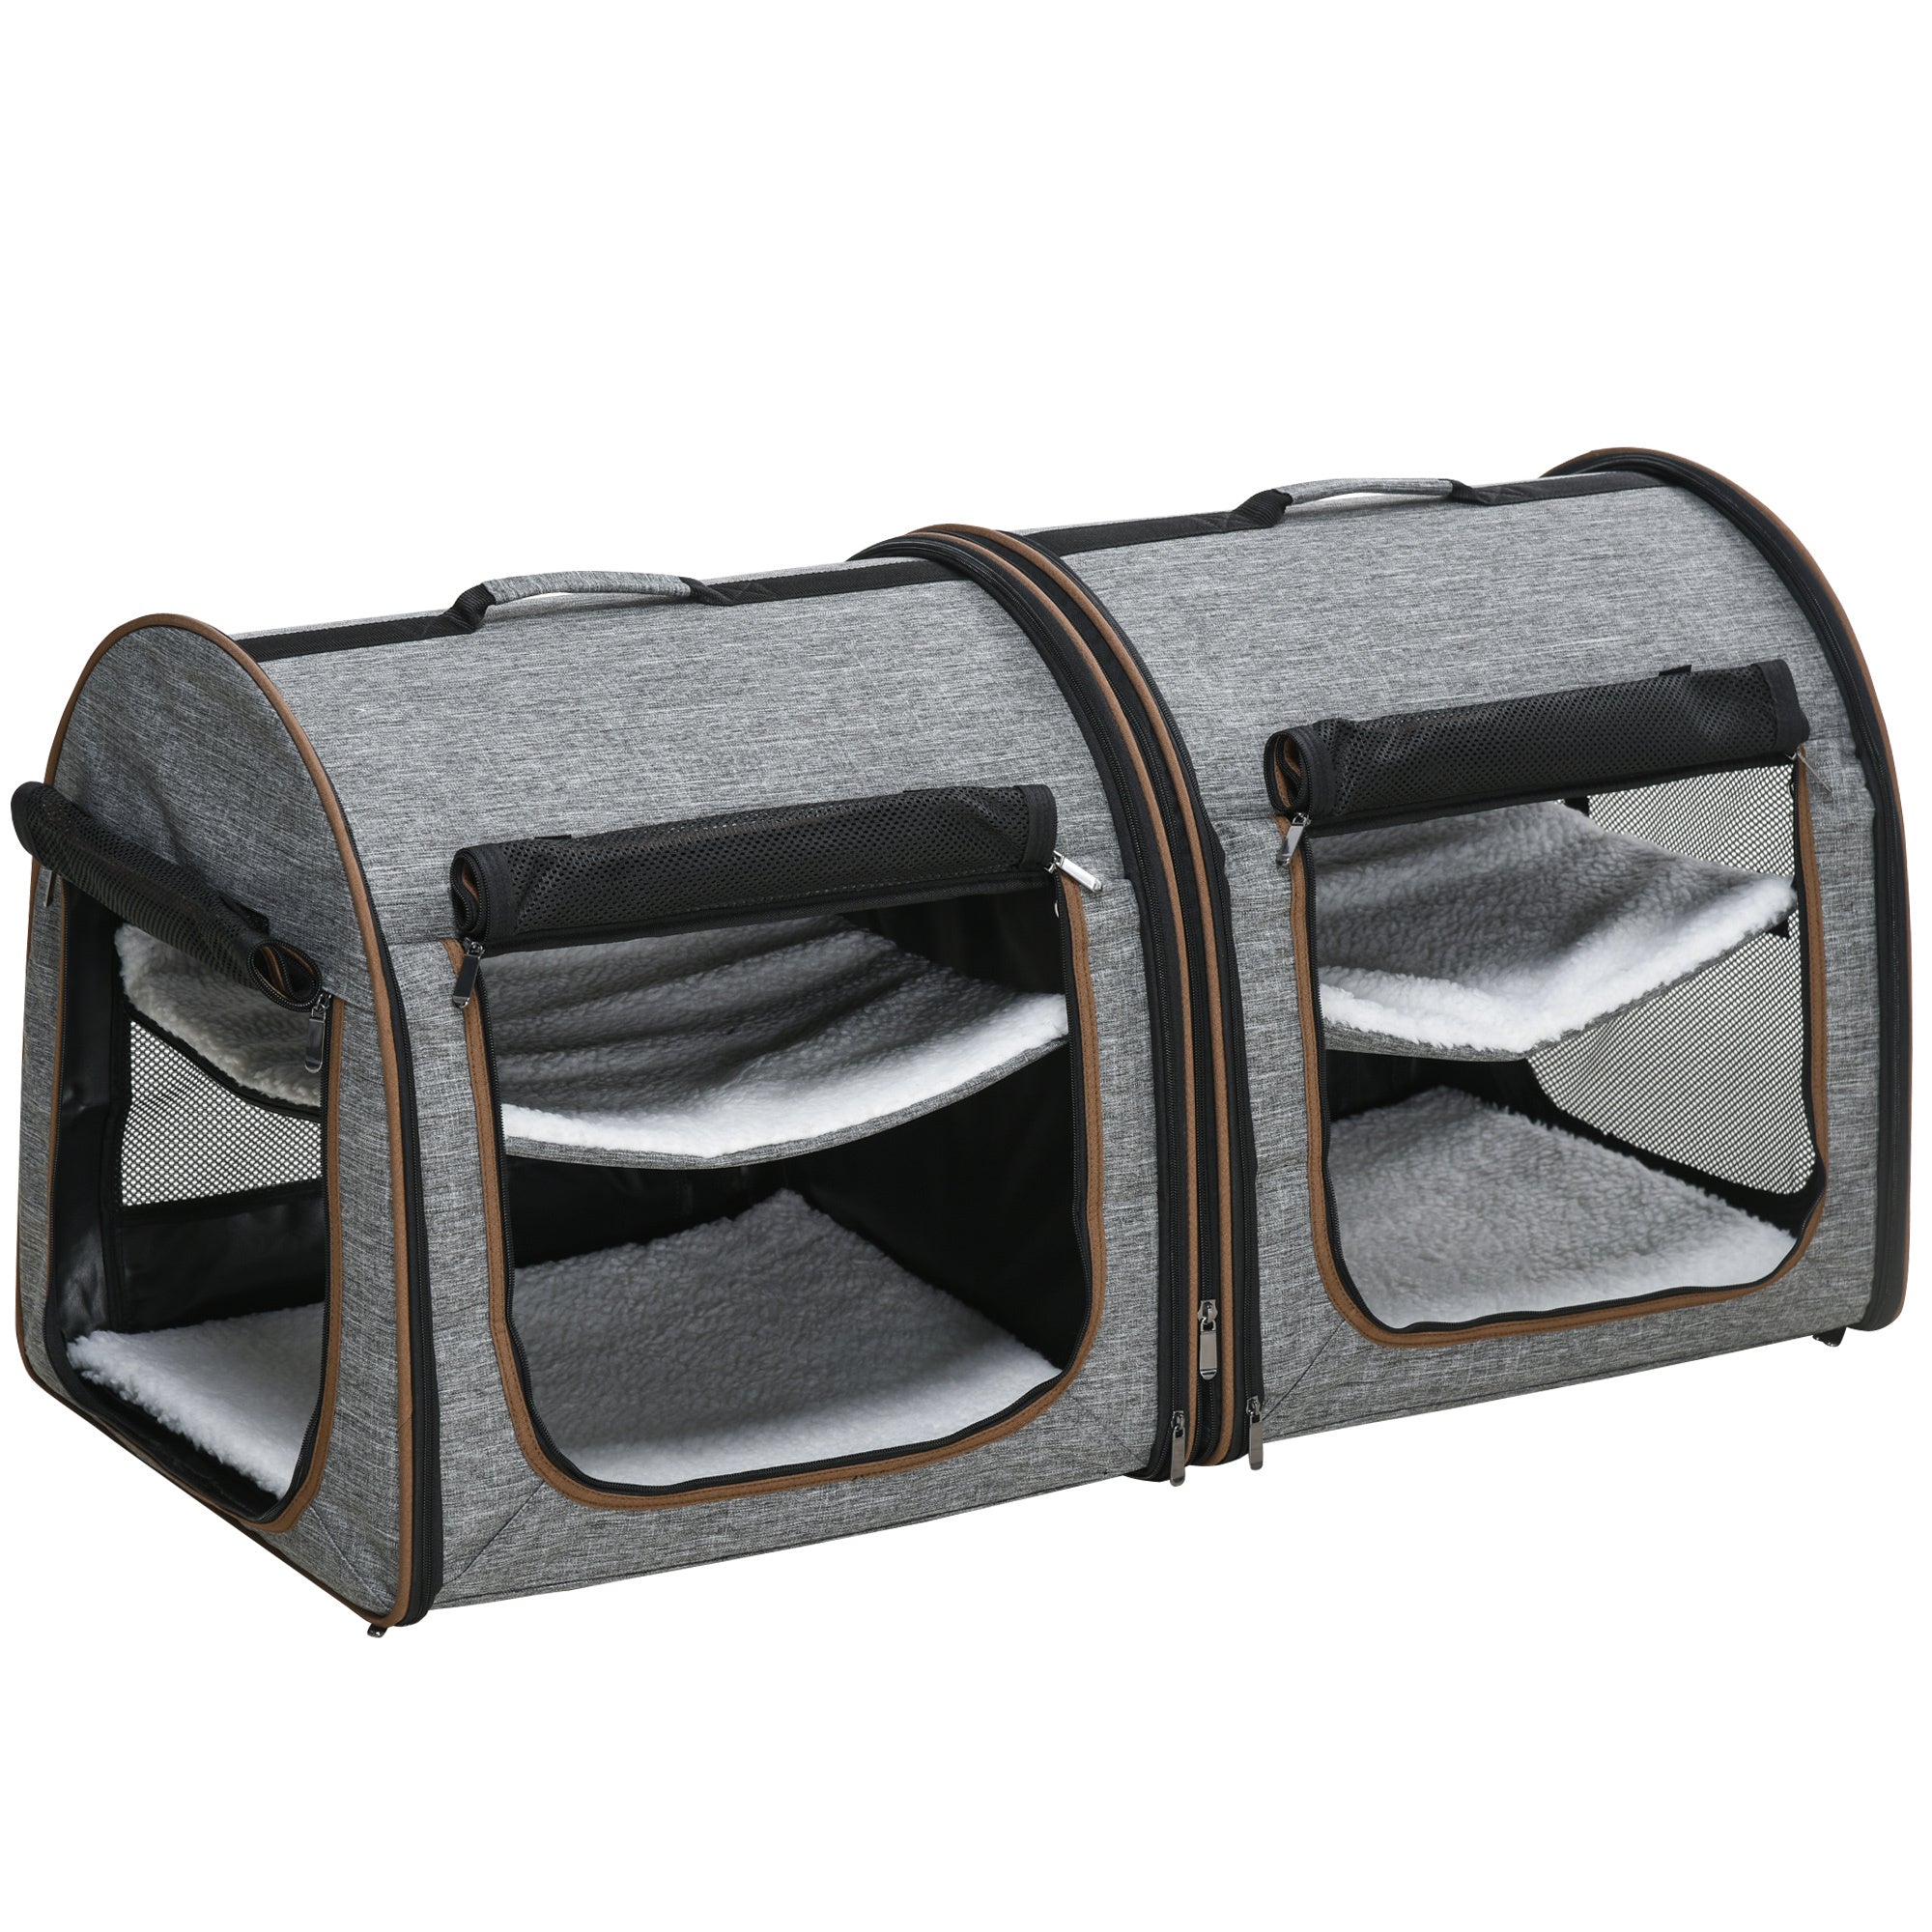 PawHut 39" Portable Soft Sided Pet Cat Carrier with gray-polyester